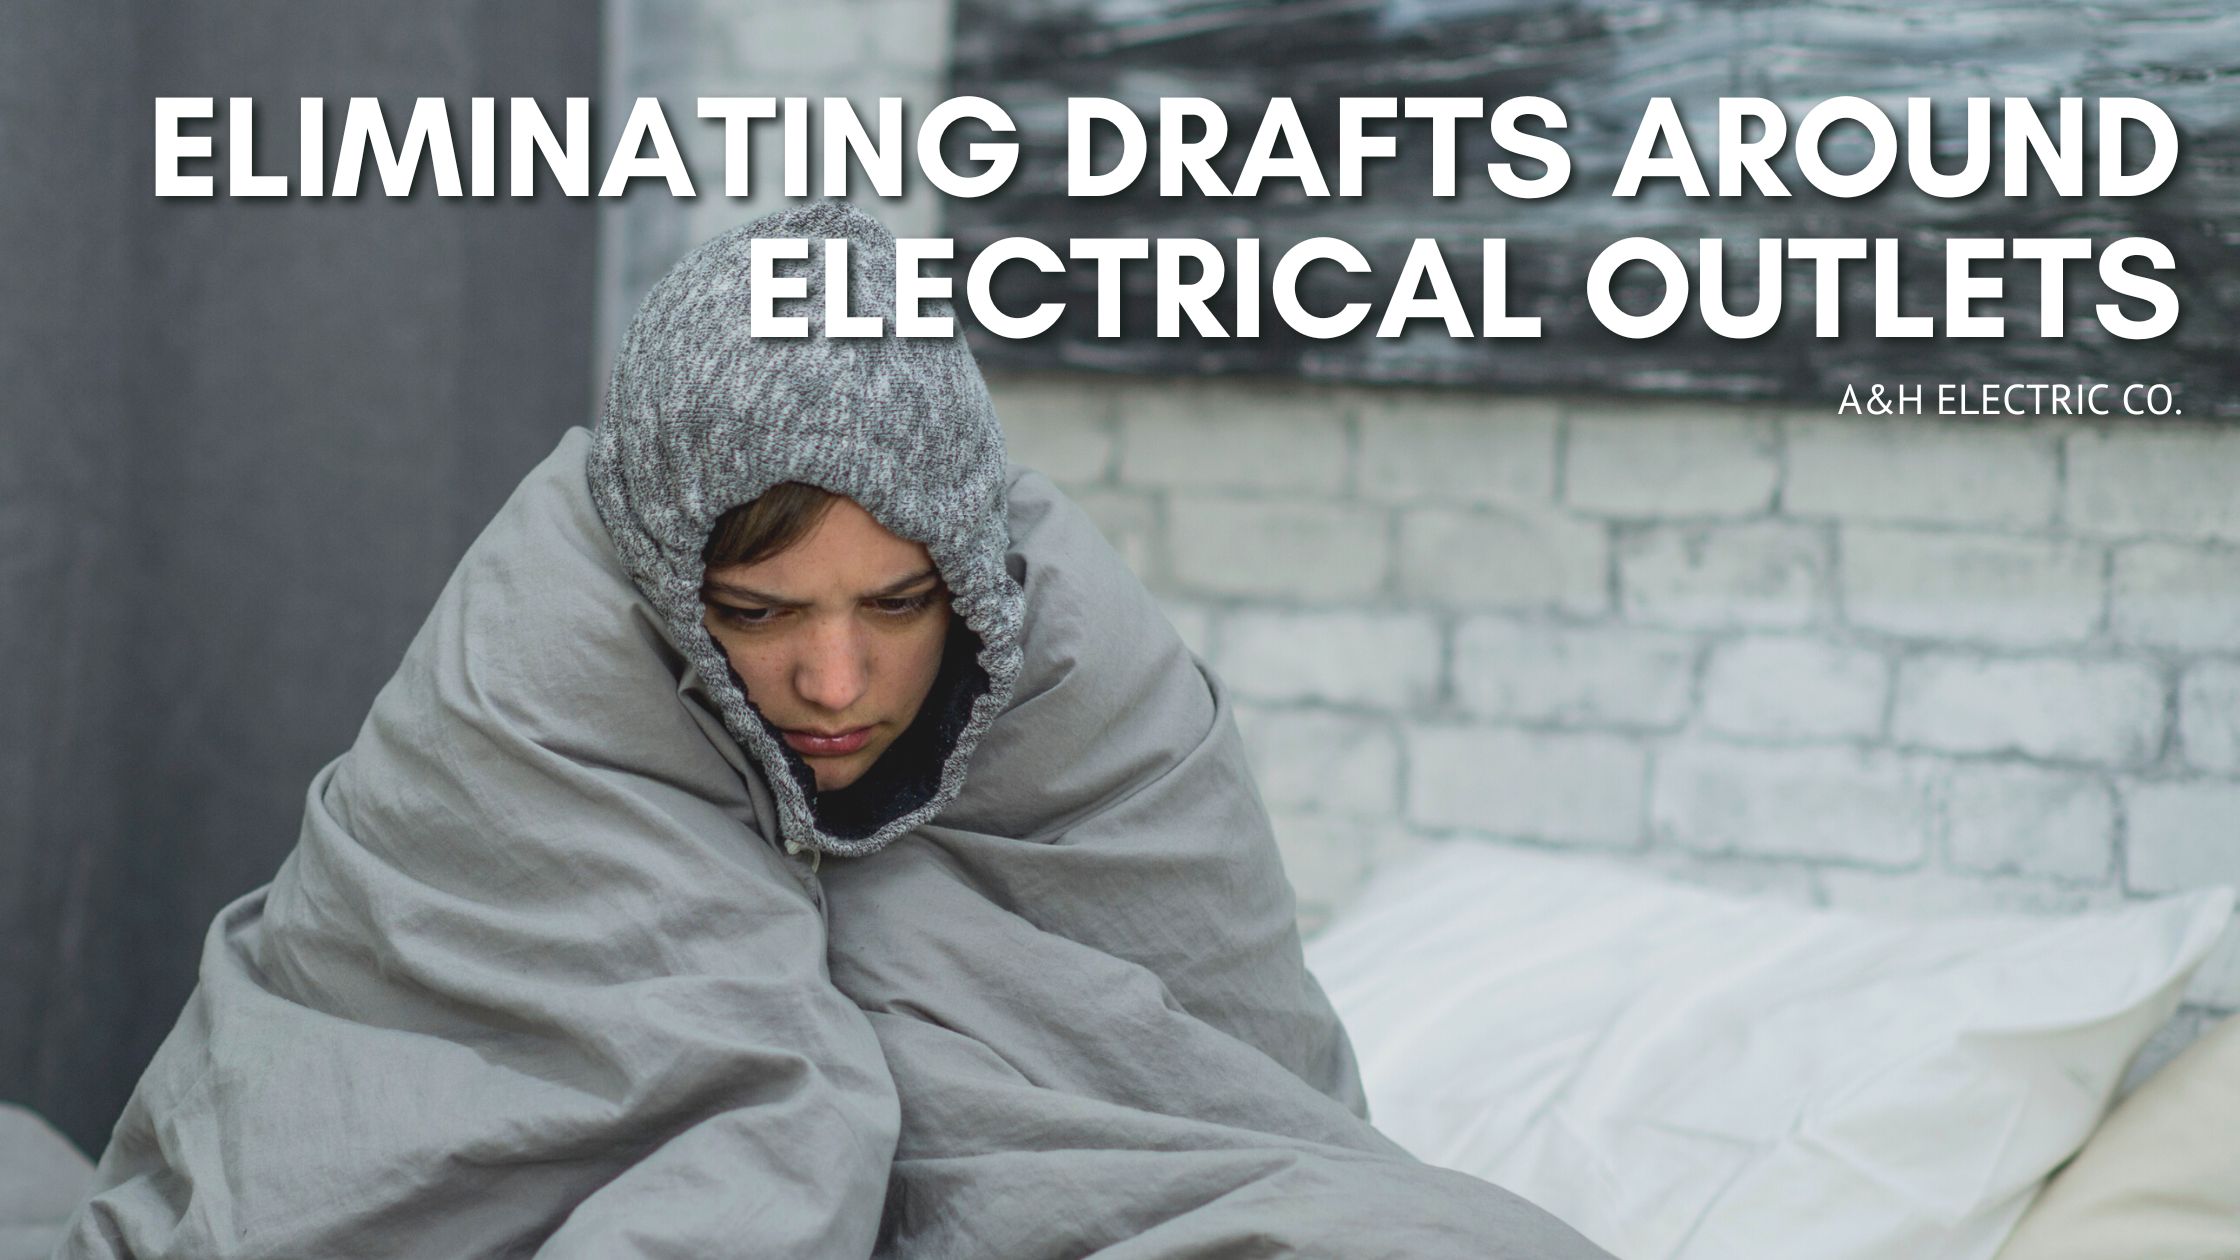 Eliminating Drafts Around Electrical Outlets